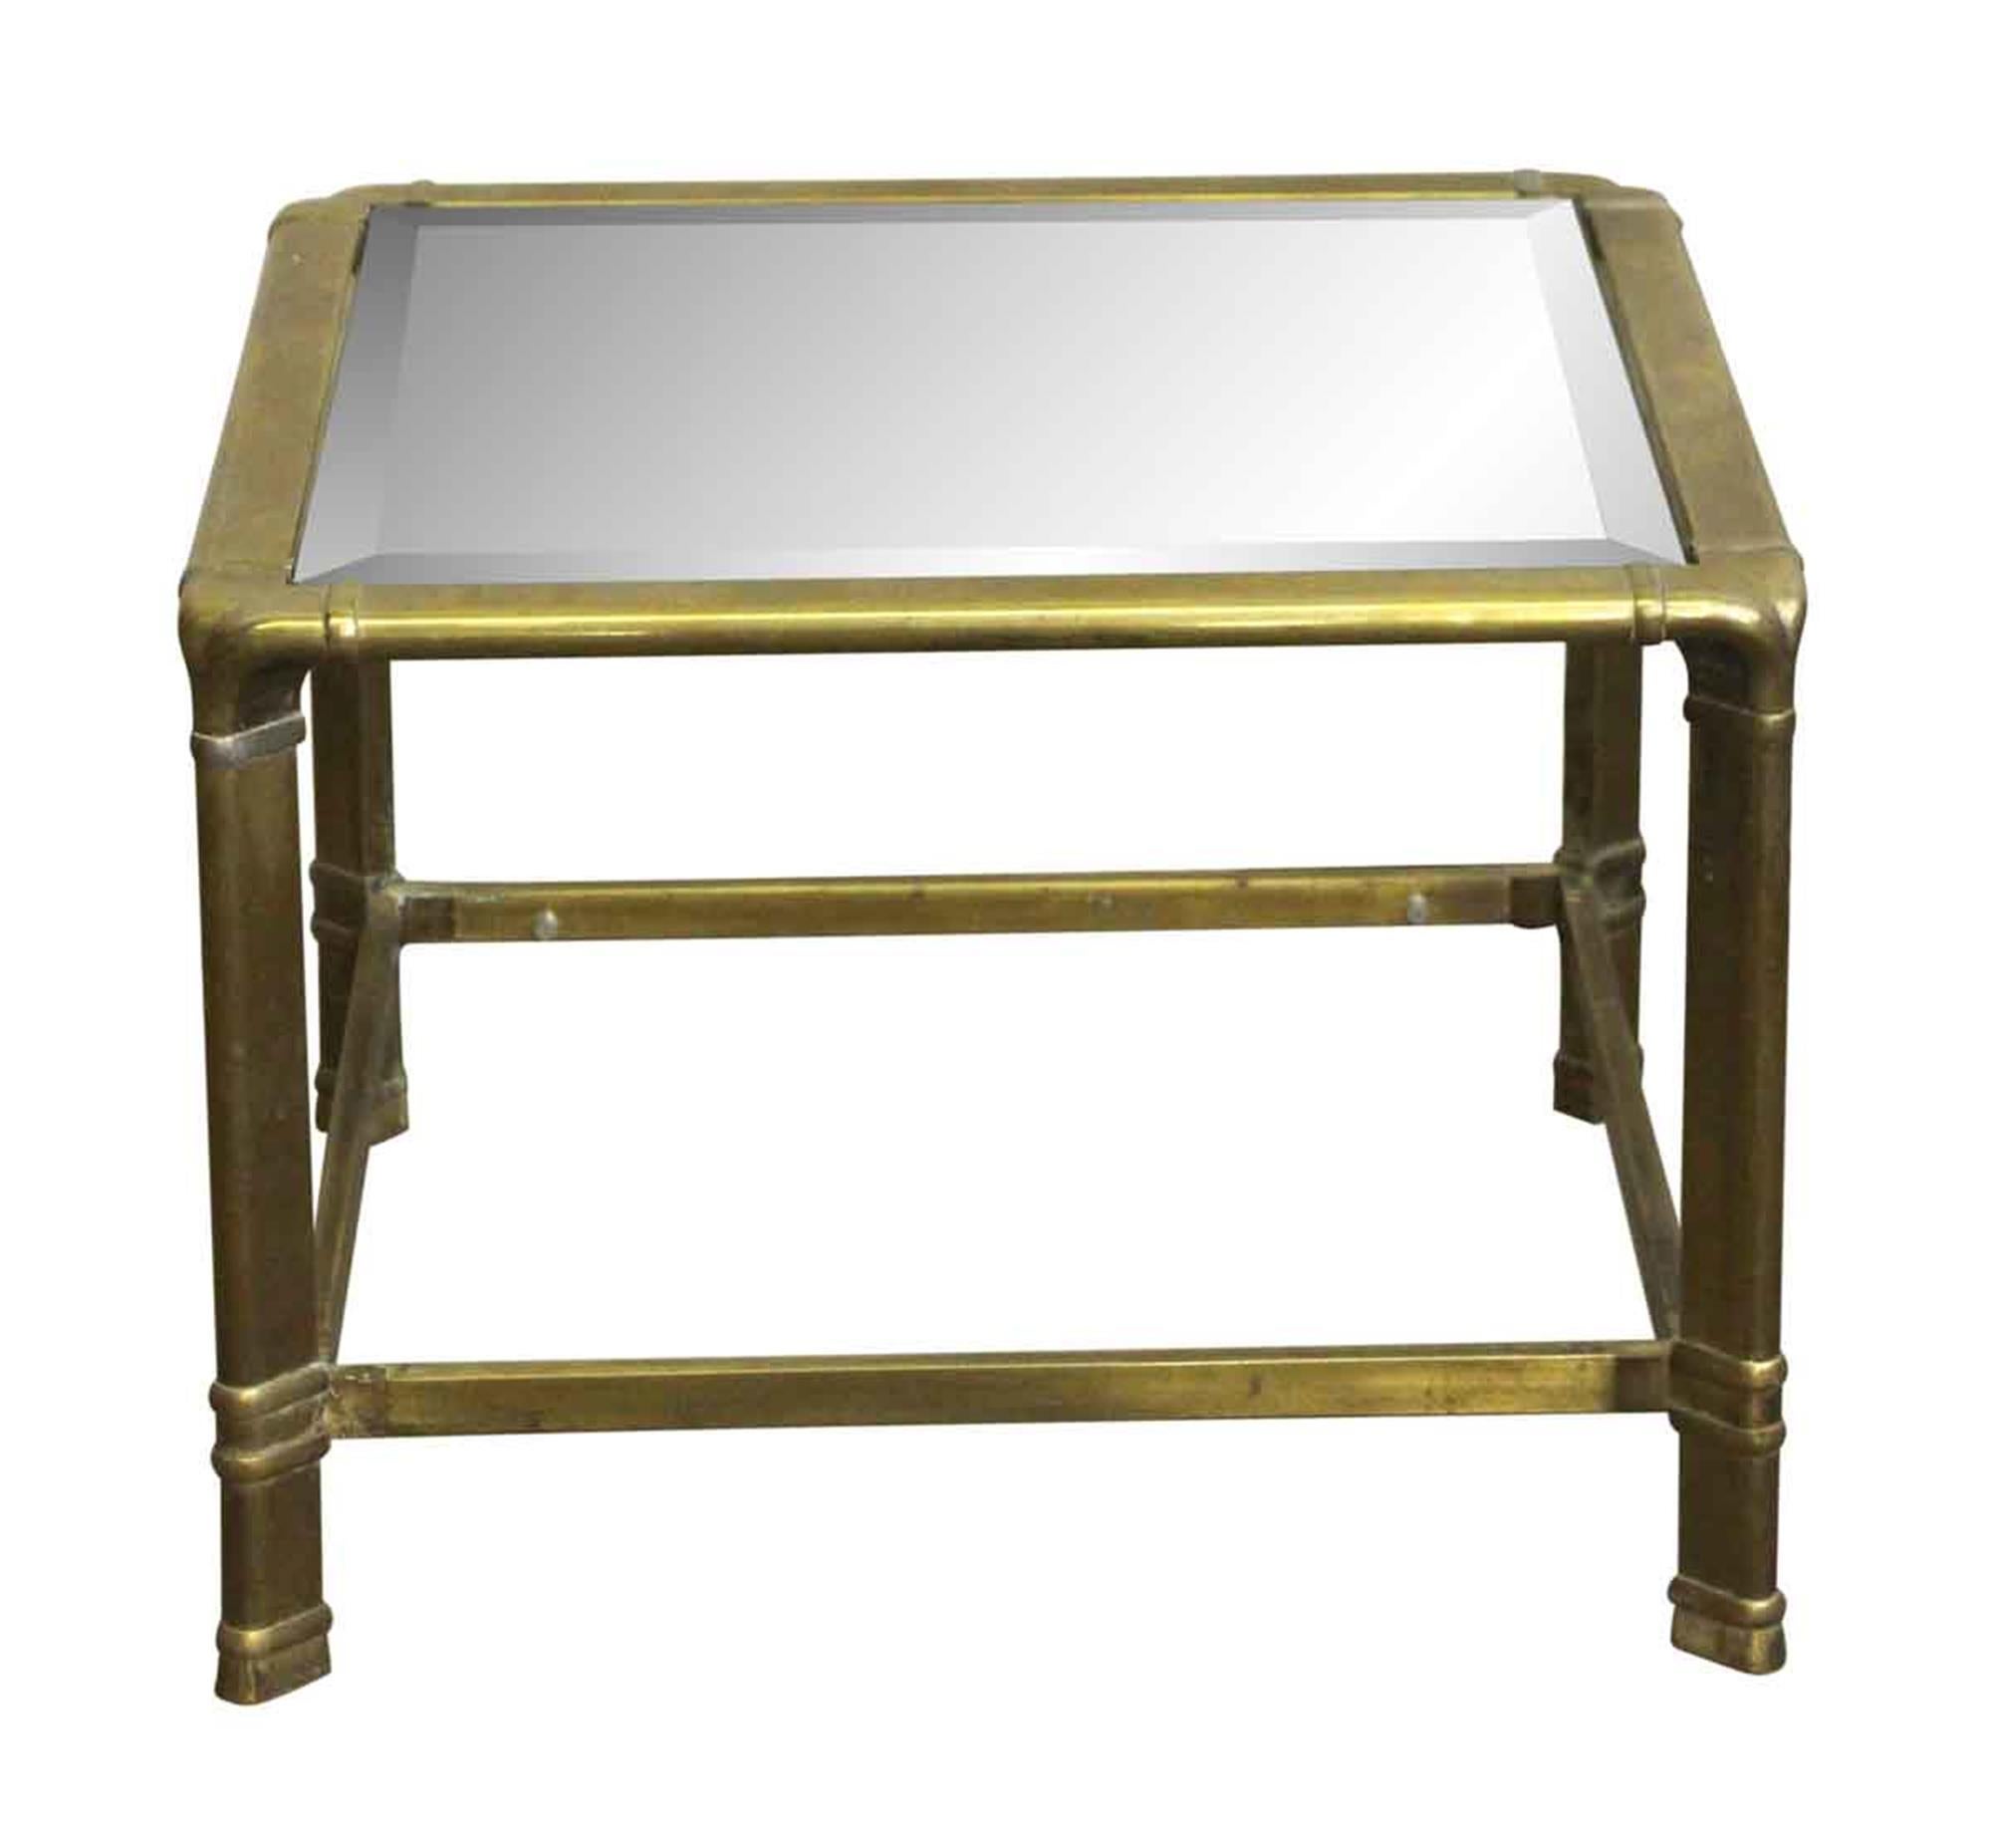 1970s brass frame end table with beveled glass done in a Mid-Century Modern style. The pin to secure the glass on the bottom needs work, therefore the bottom glass is not pictured. There is a chip in the bottom glass piece as well. This can be seen